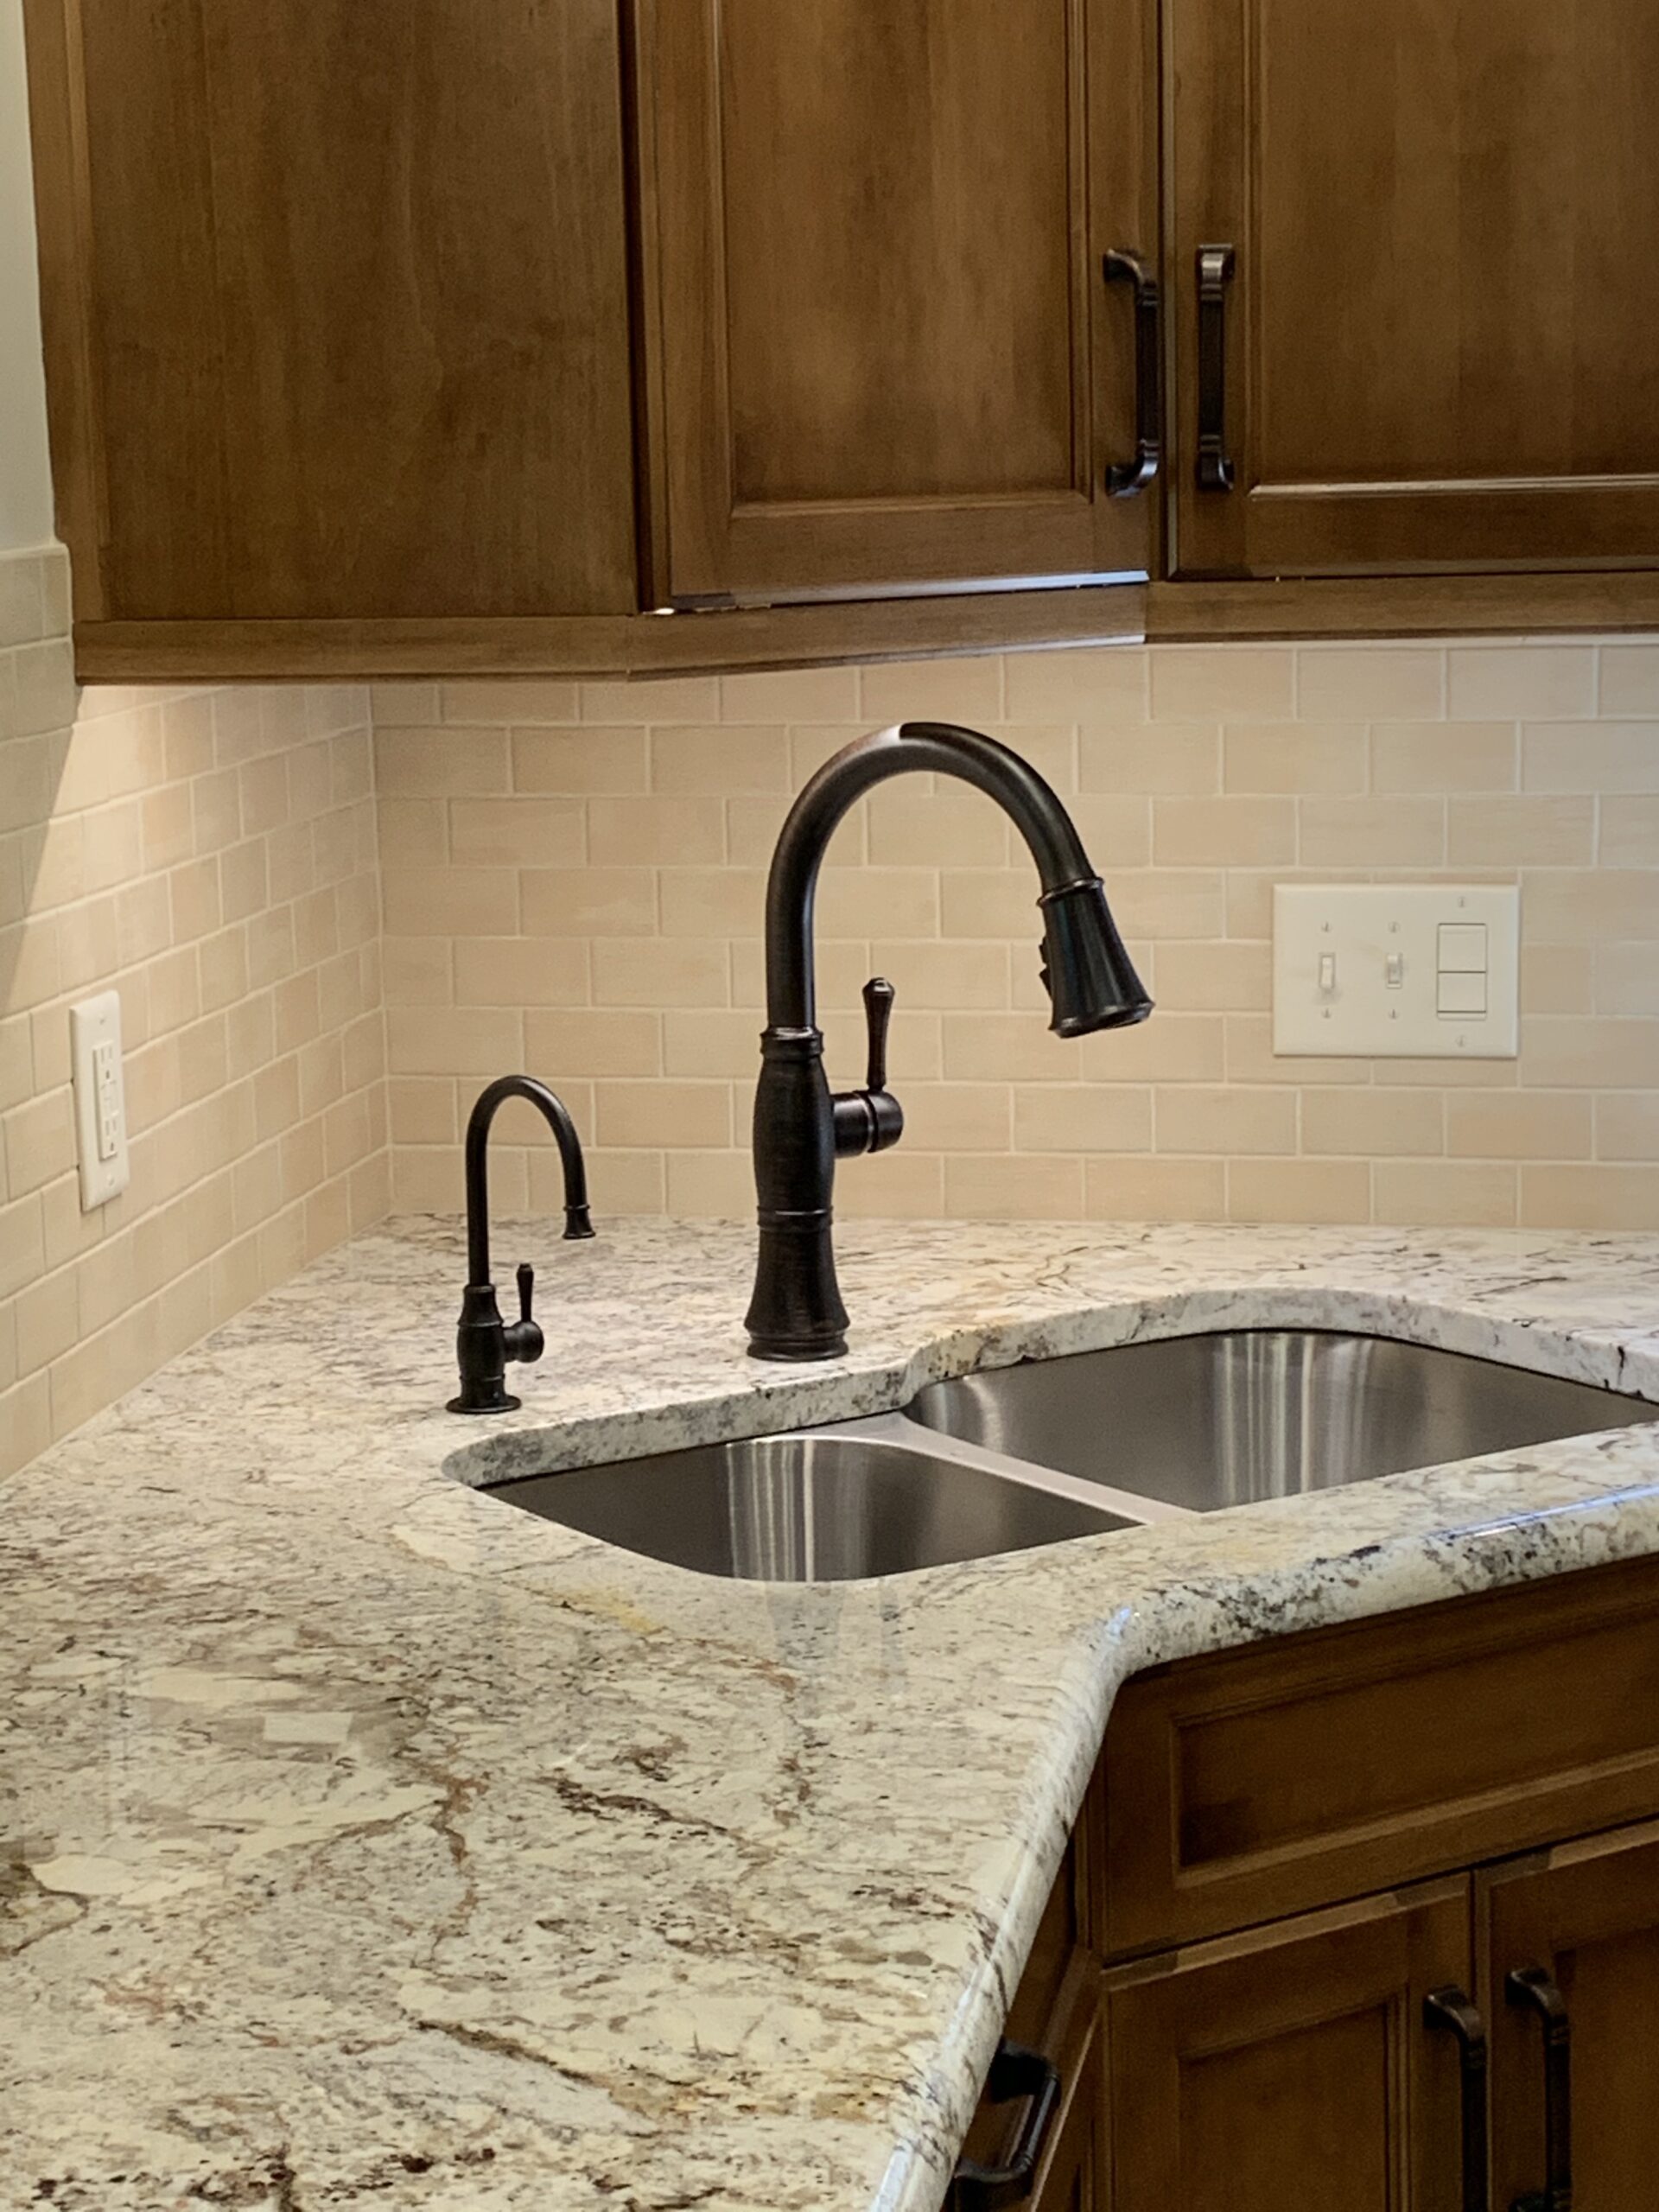 Traditional black kitchen faucet, two separate sinks, marble counter